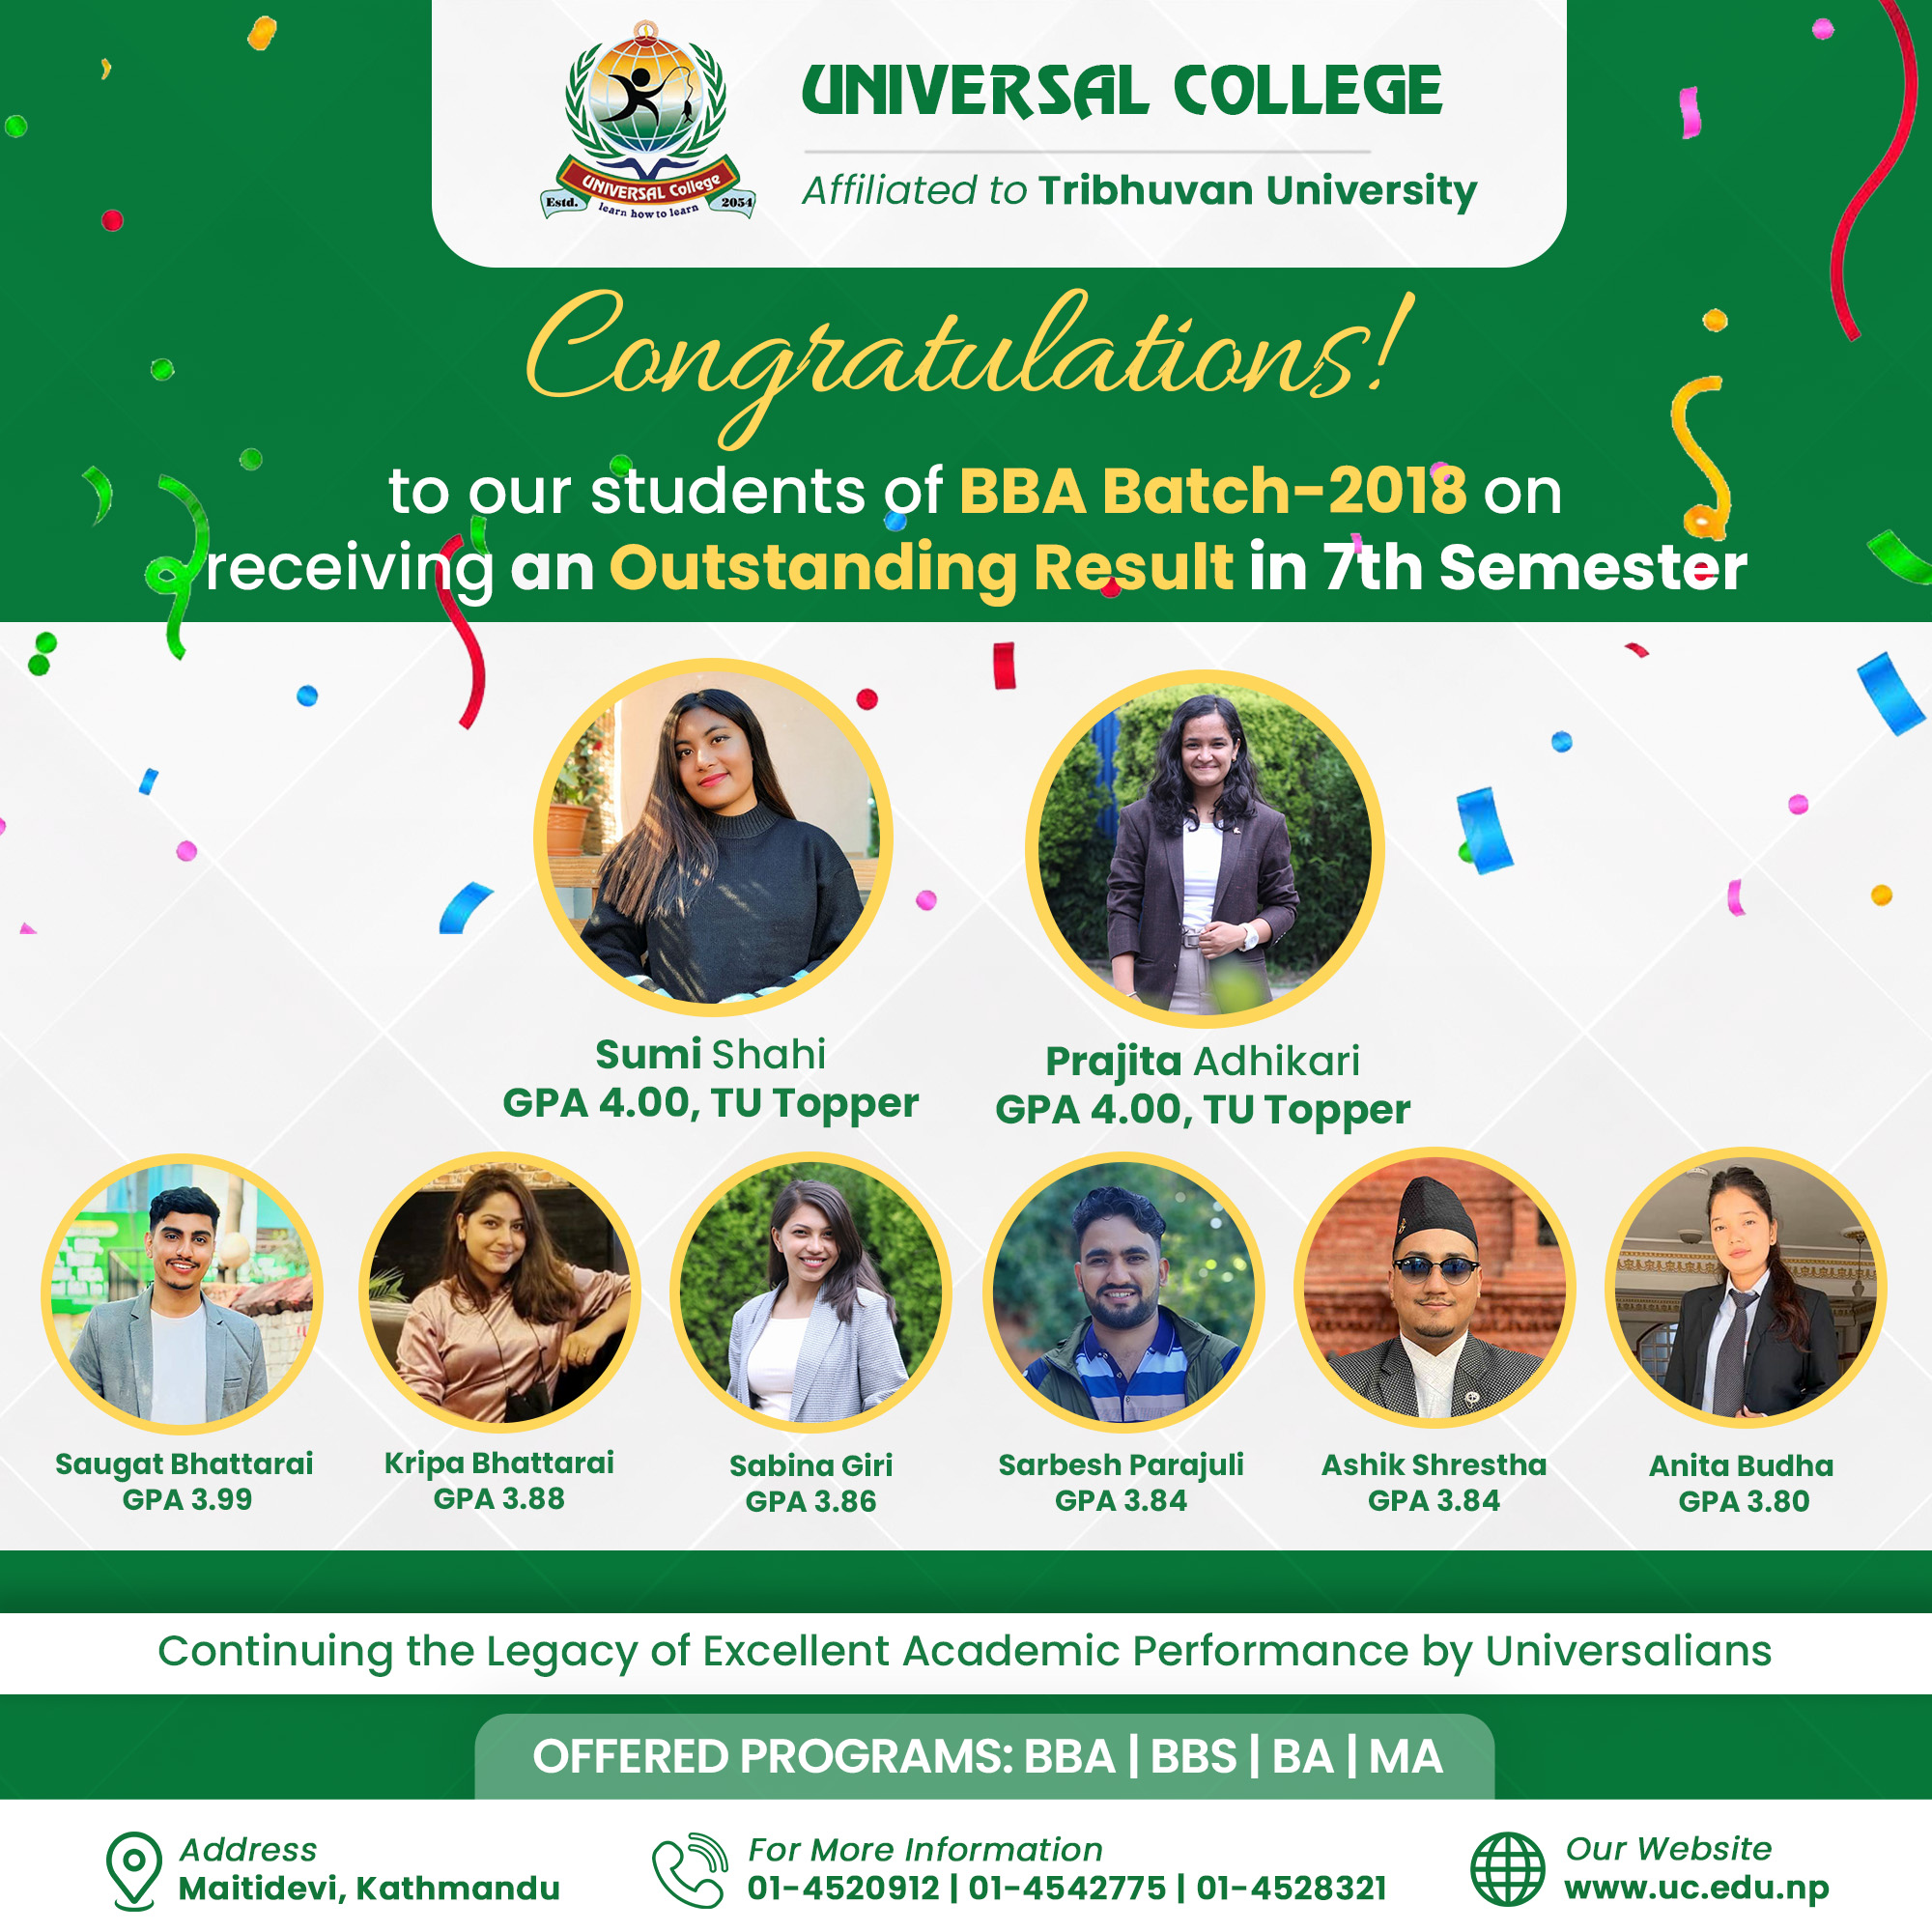 Congratulations to the exceptional students of Universal College